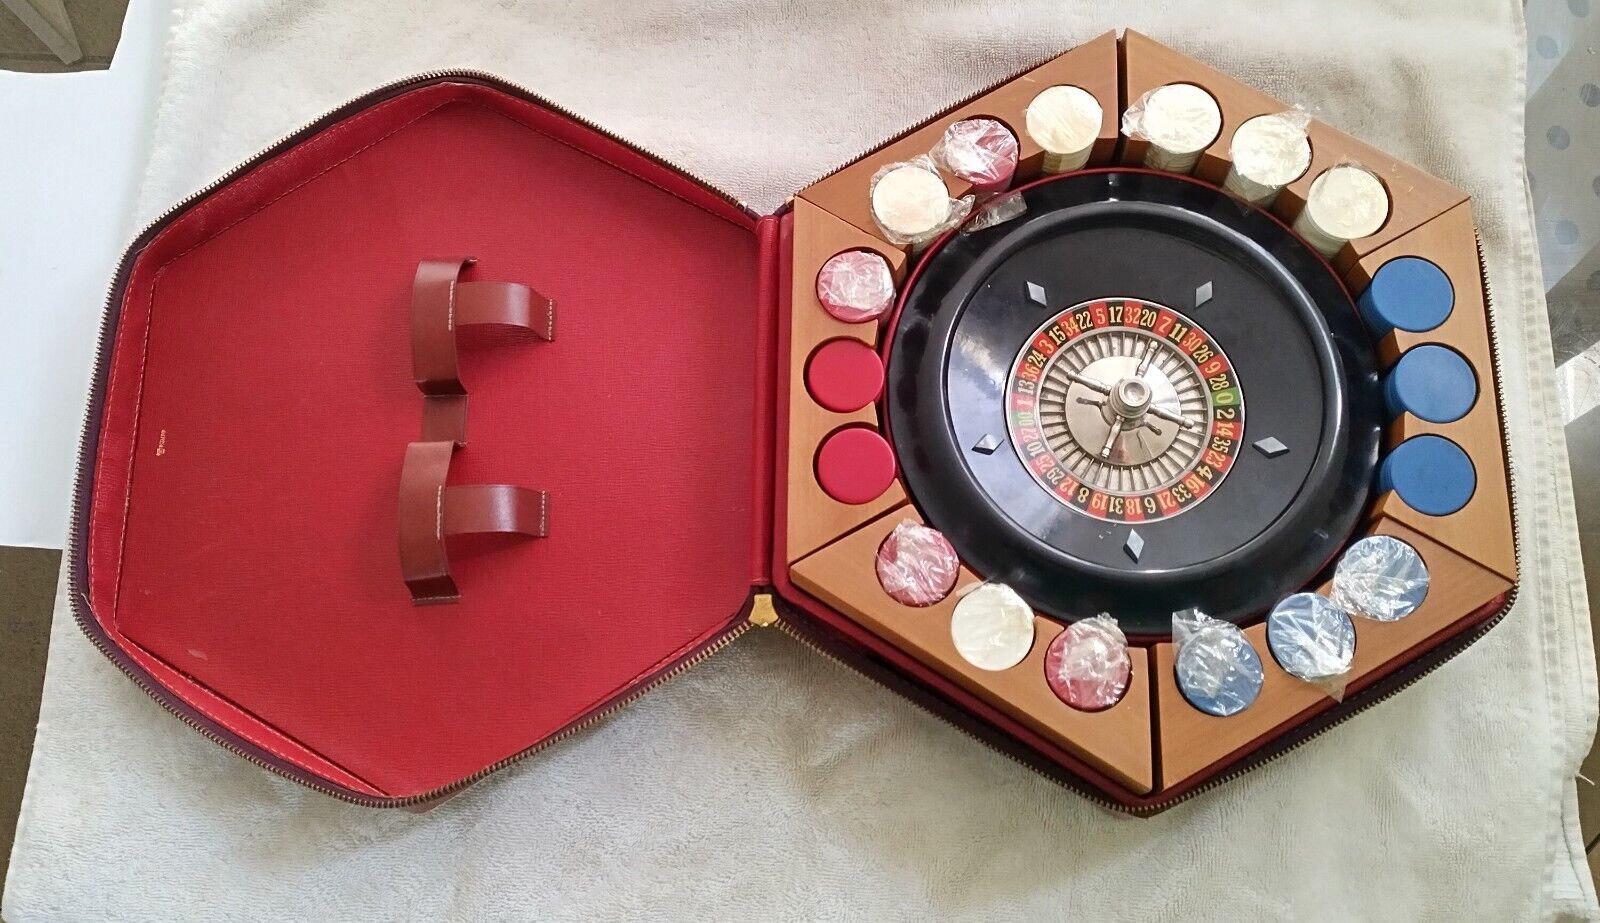 900 Vintage Poker Chips With Rumpp Leather Case & Bakelite Roulette